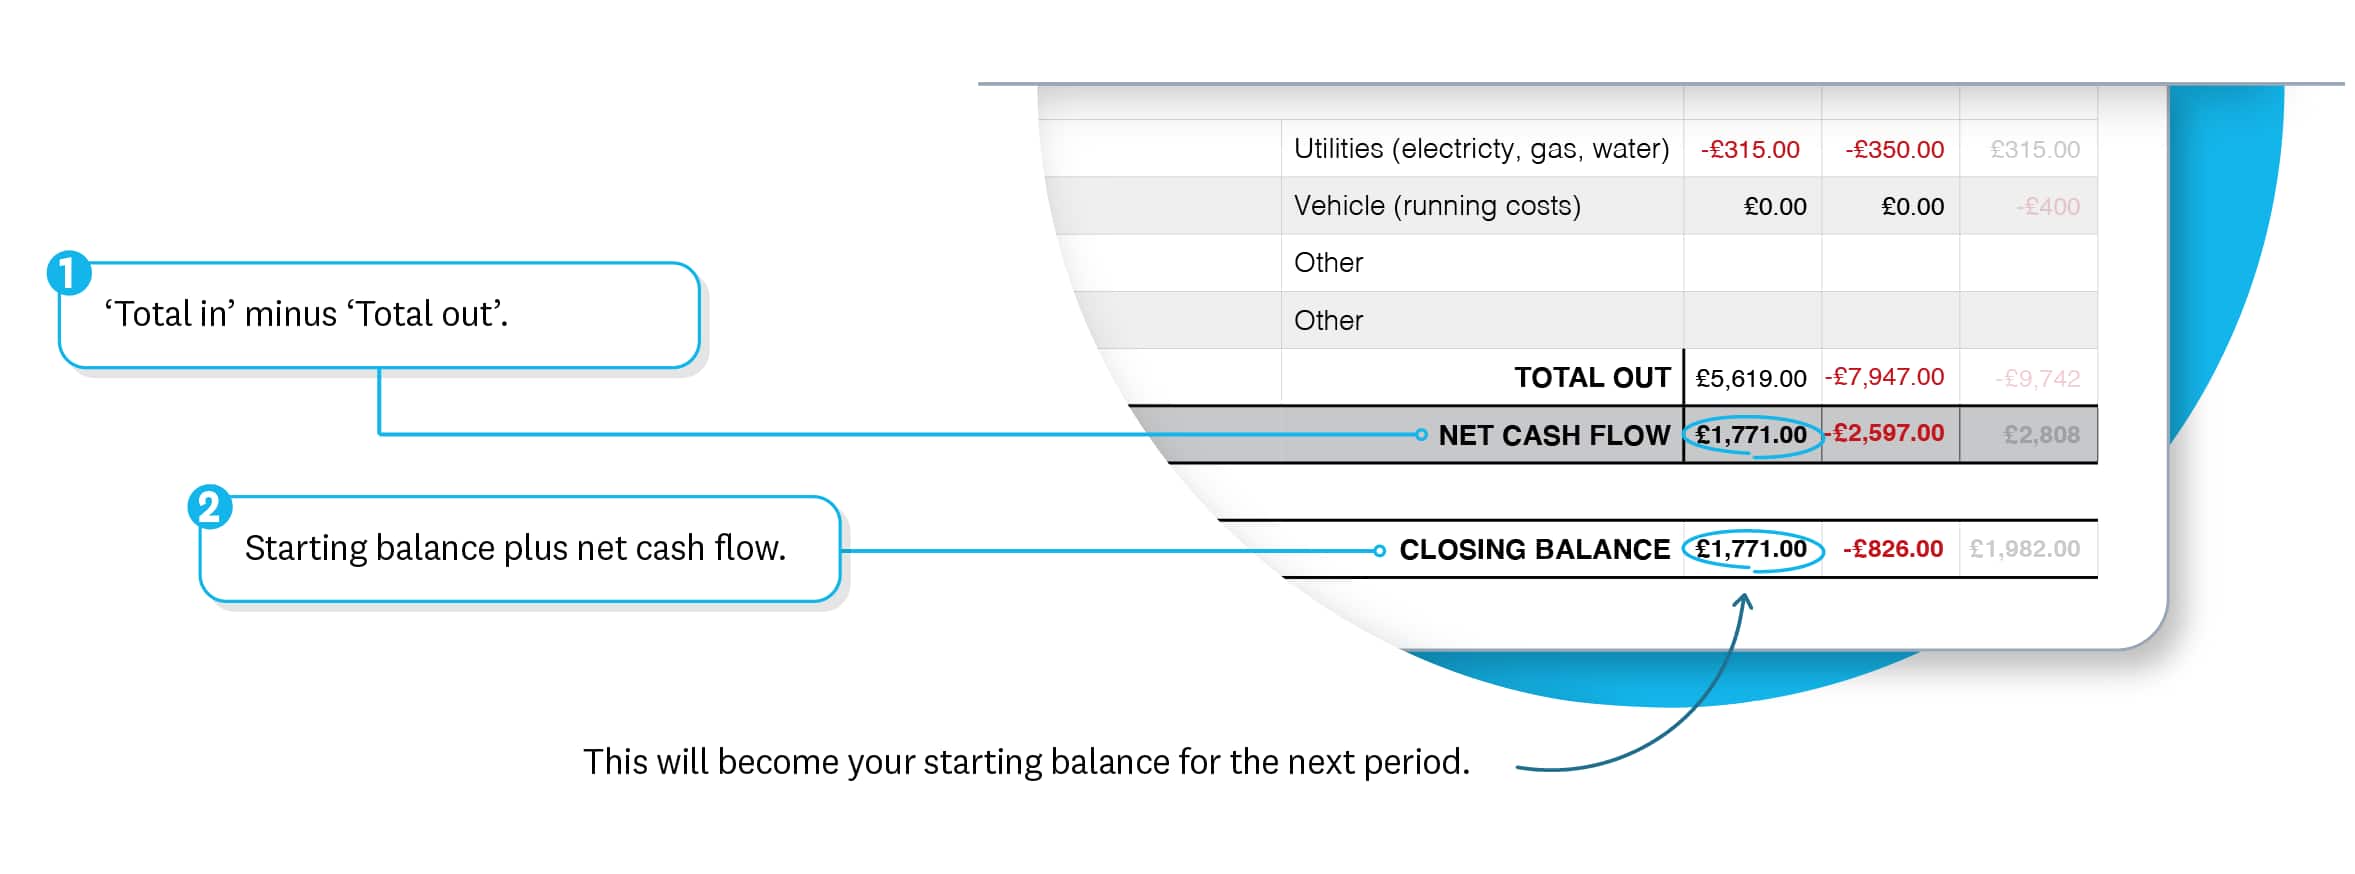 Cash flow forecast results show total cash in minus total cash out to give you a net cash flow and a closing balance. 